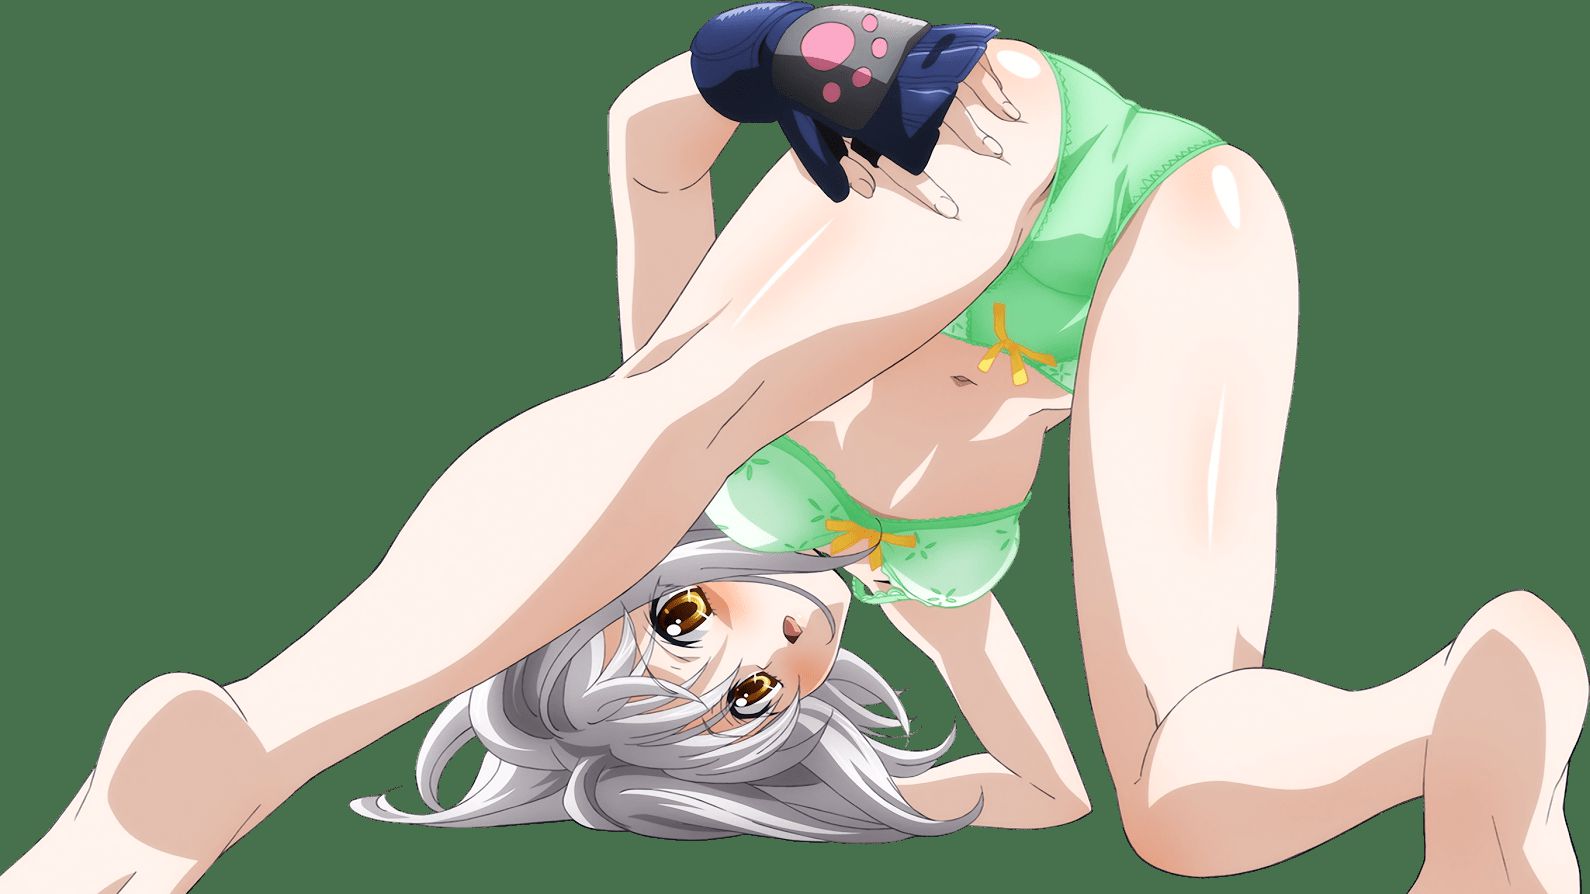 [Anime character material] png background of animated characters erotic images that 161 14